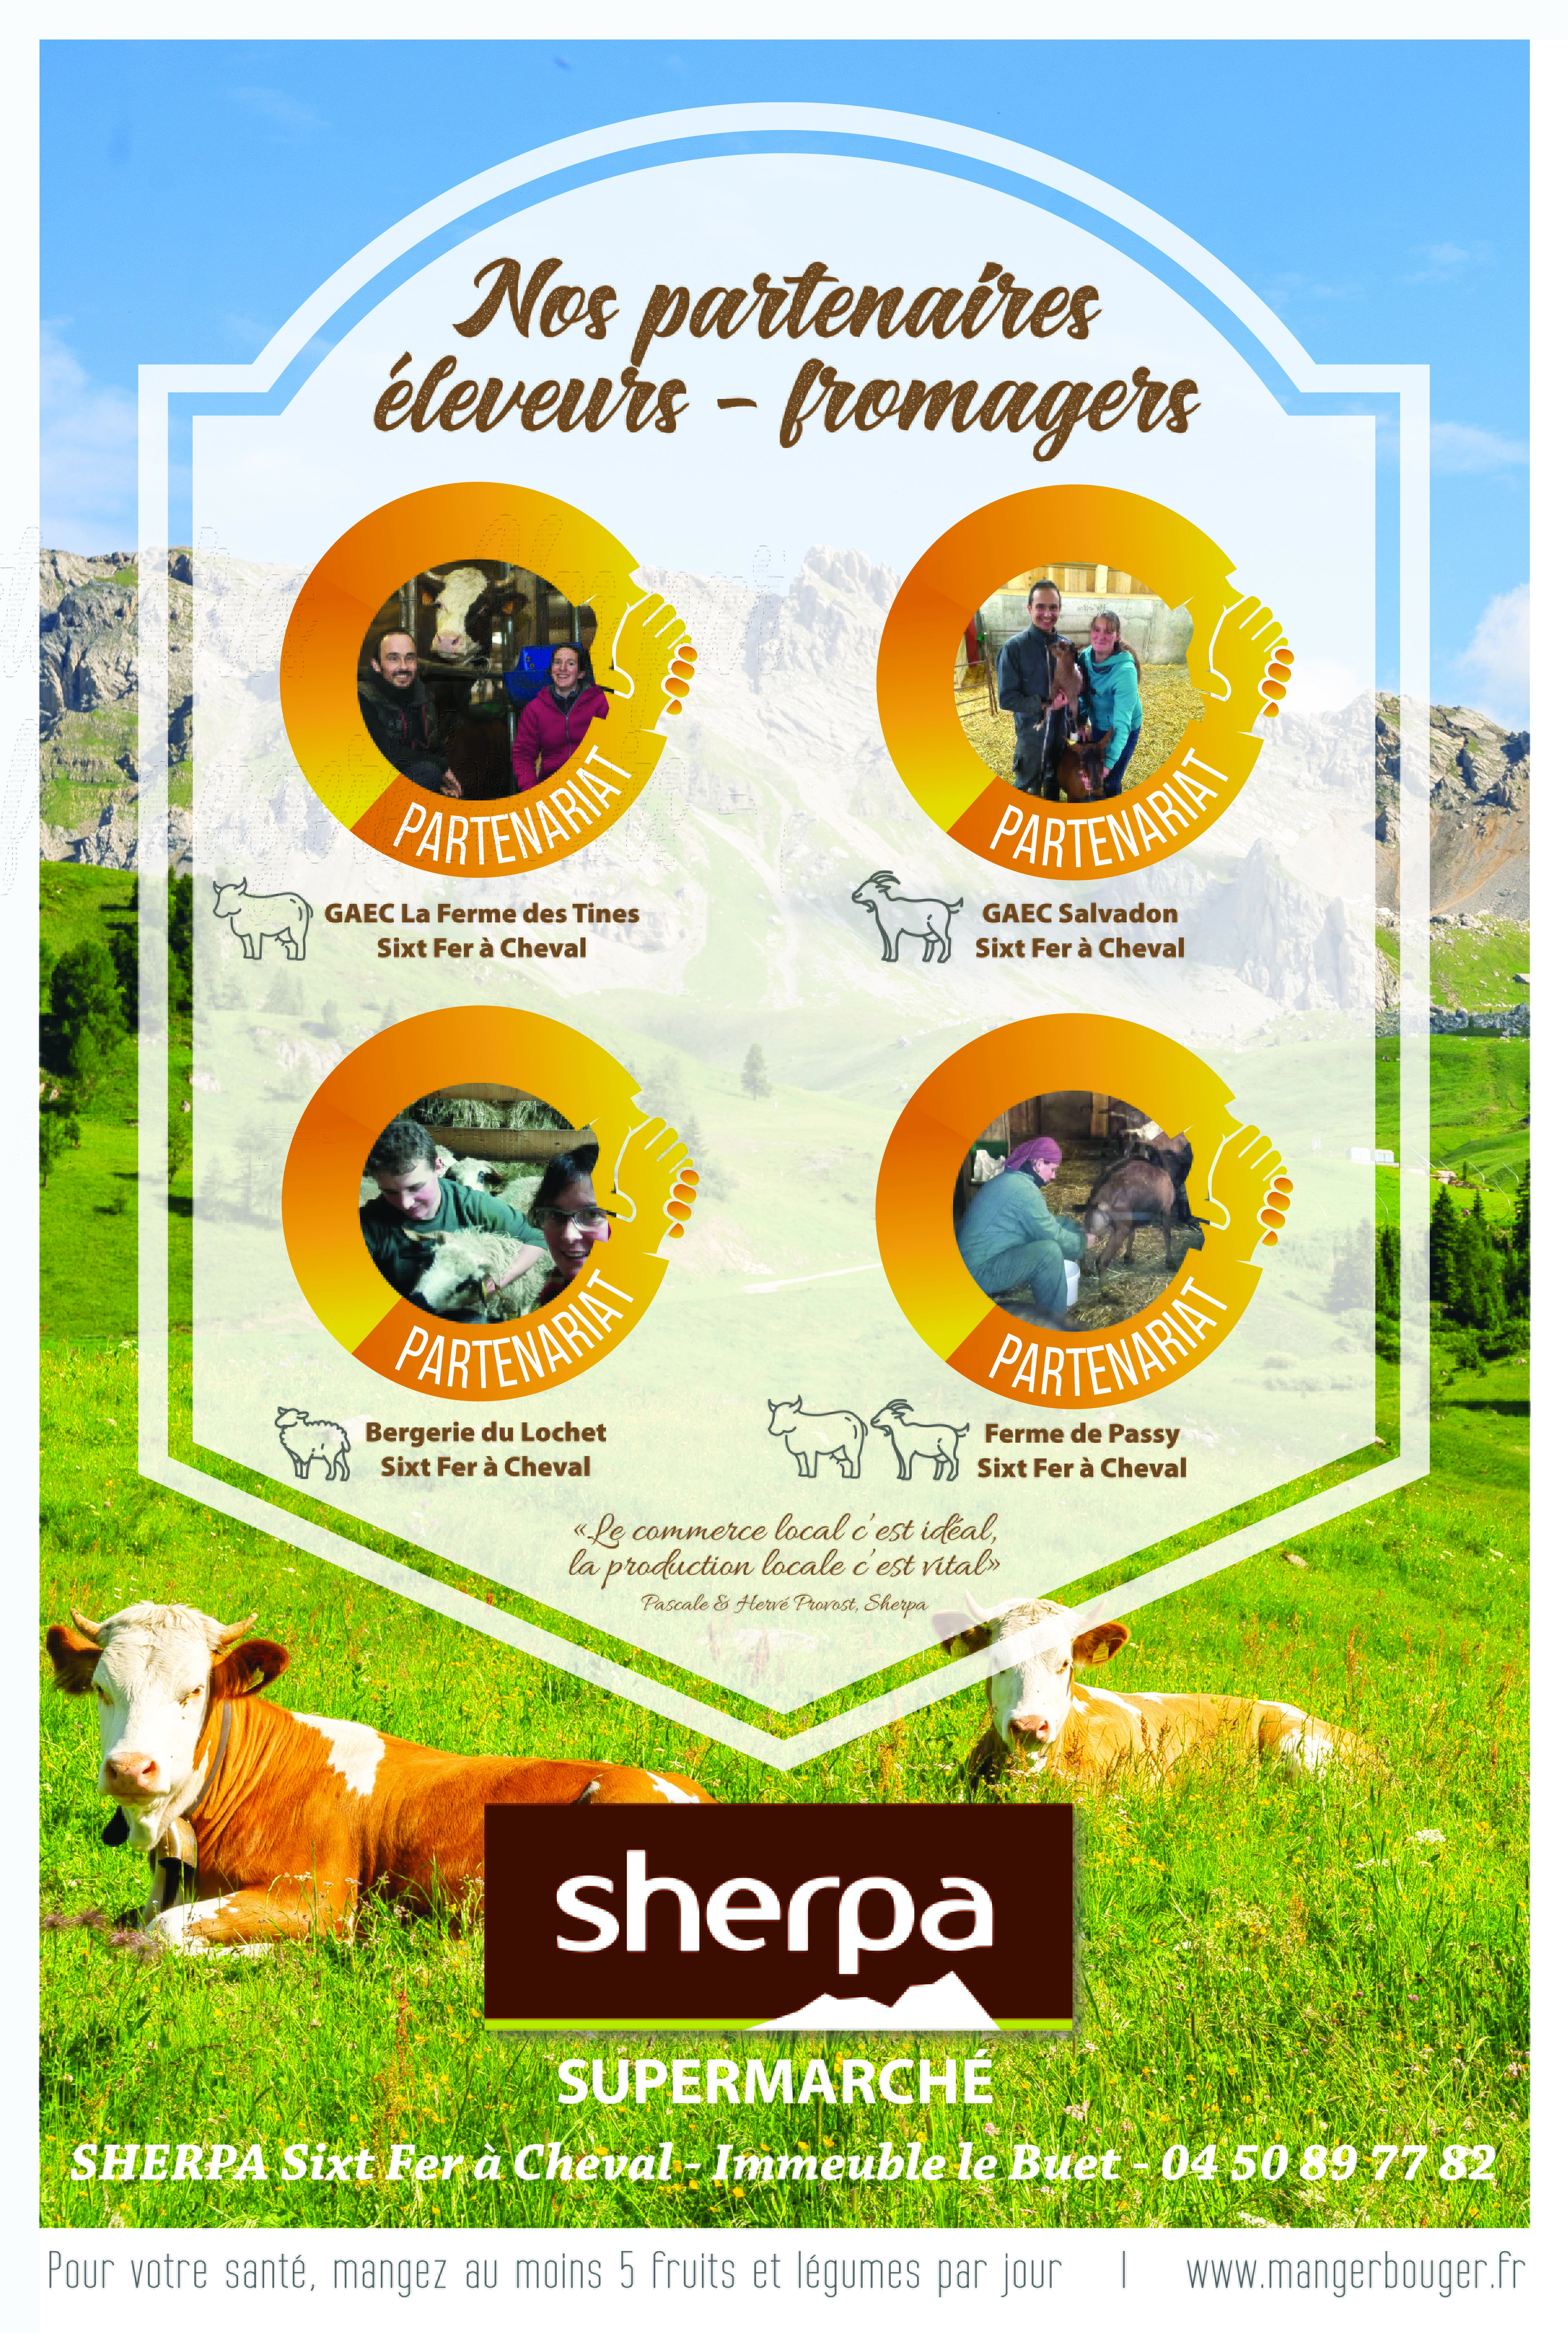 Sherpa supermarket Sixt Fer à Cheval cheese producer partner